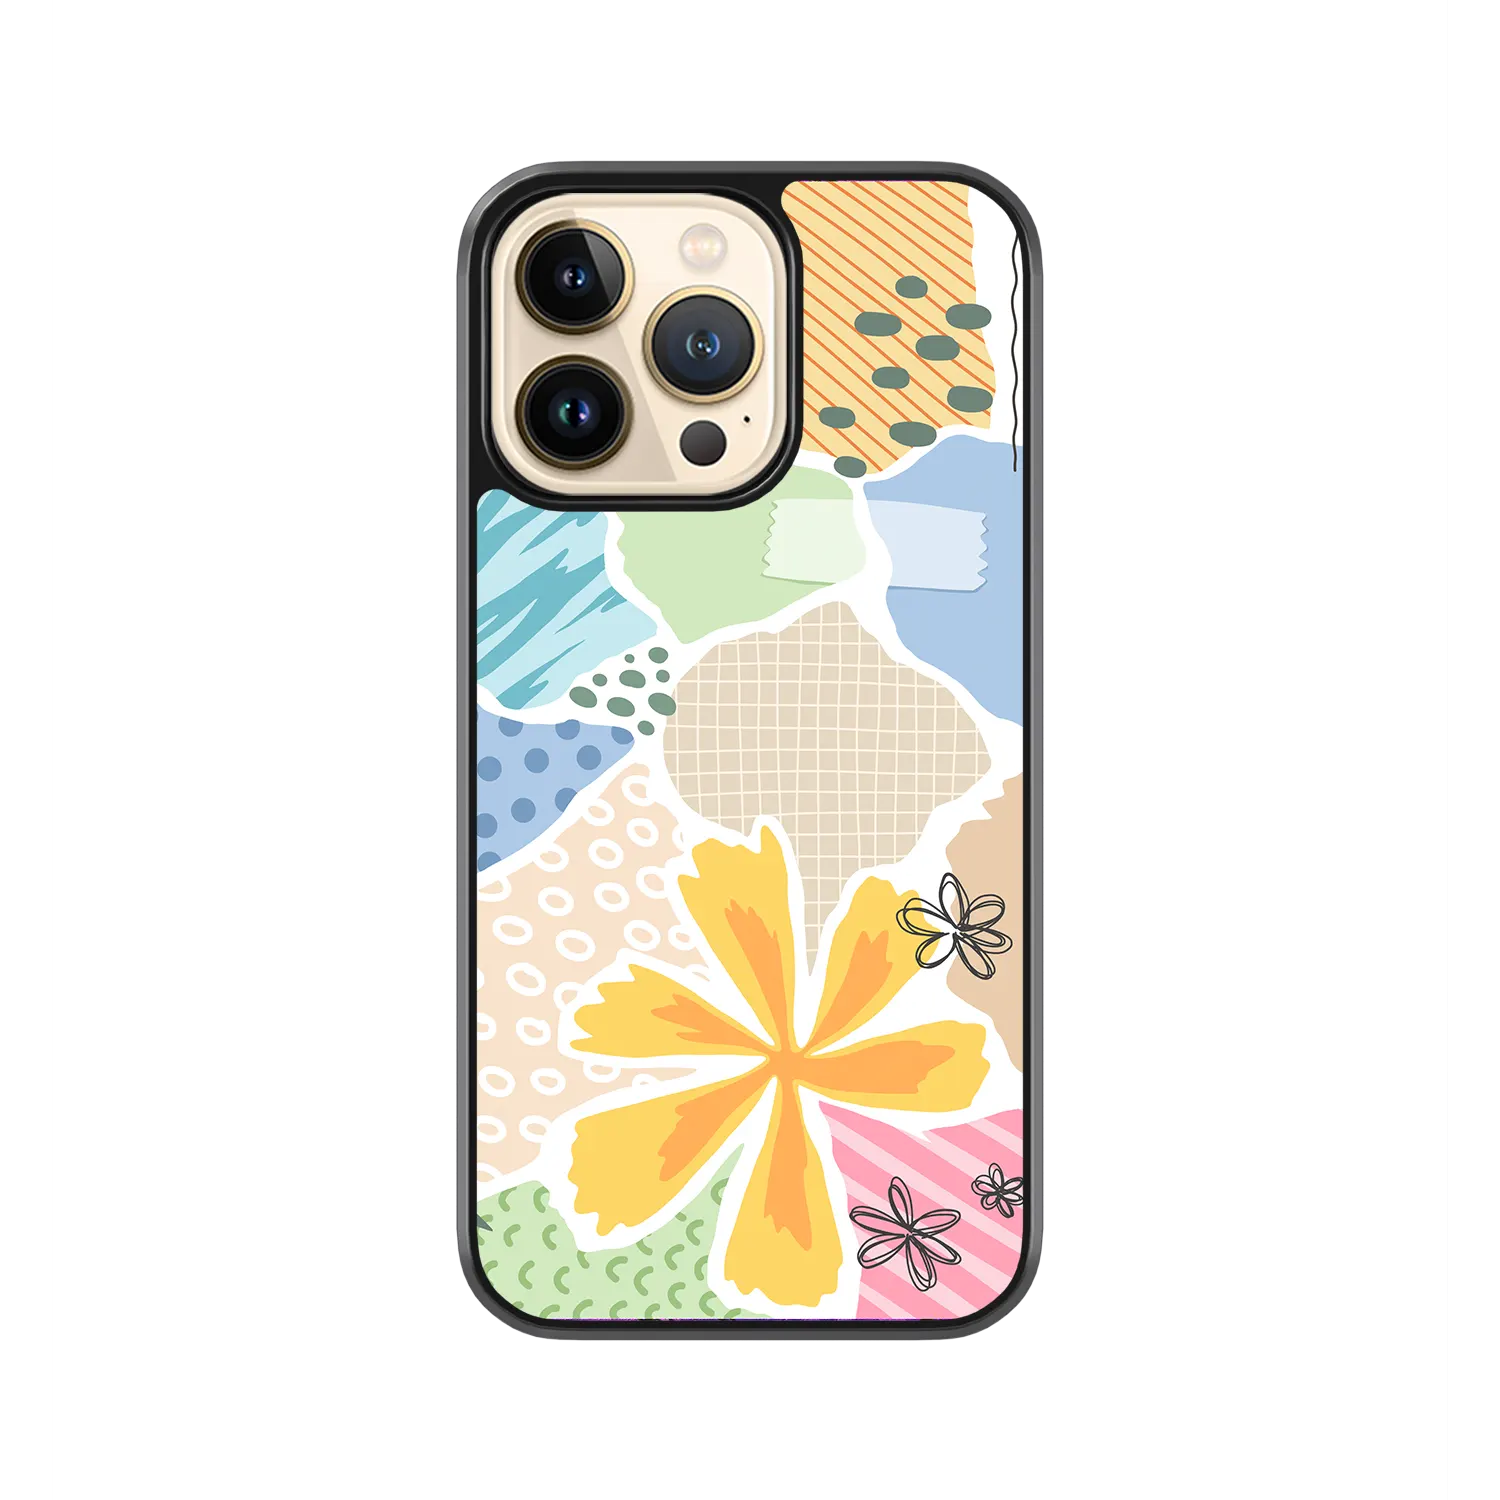 Floral Collage iphone 11 pro case